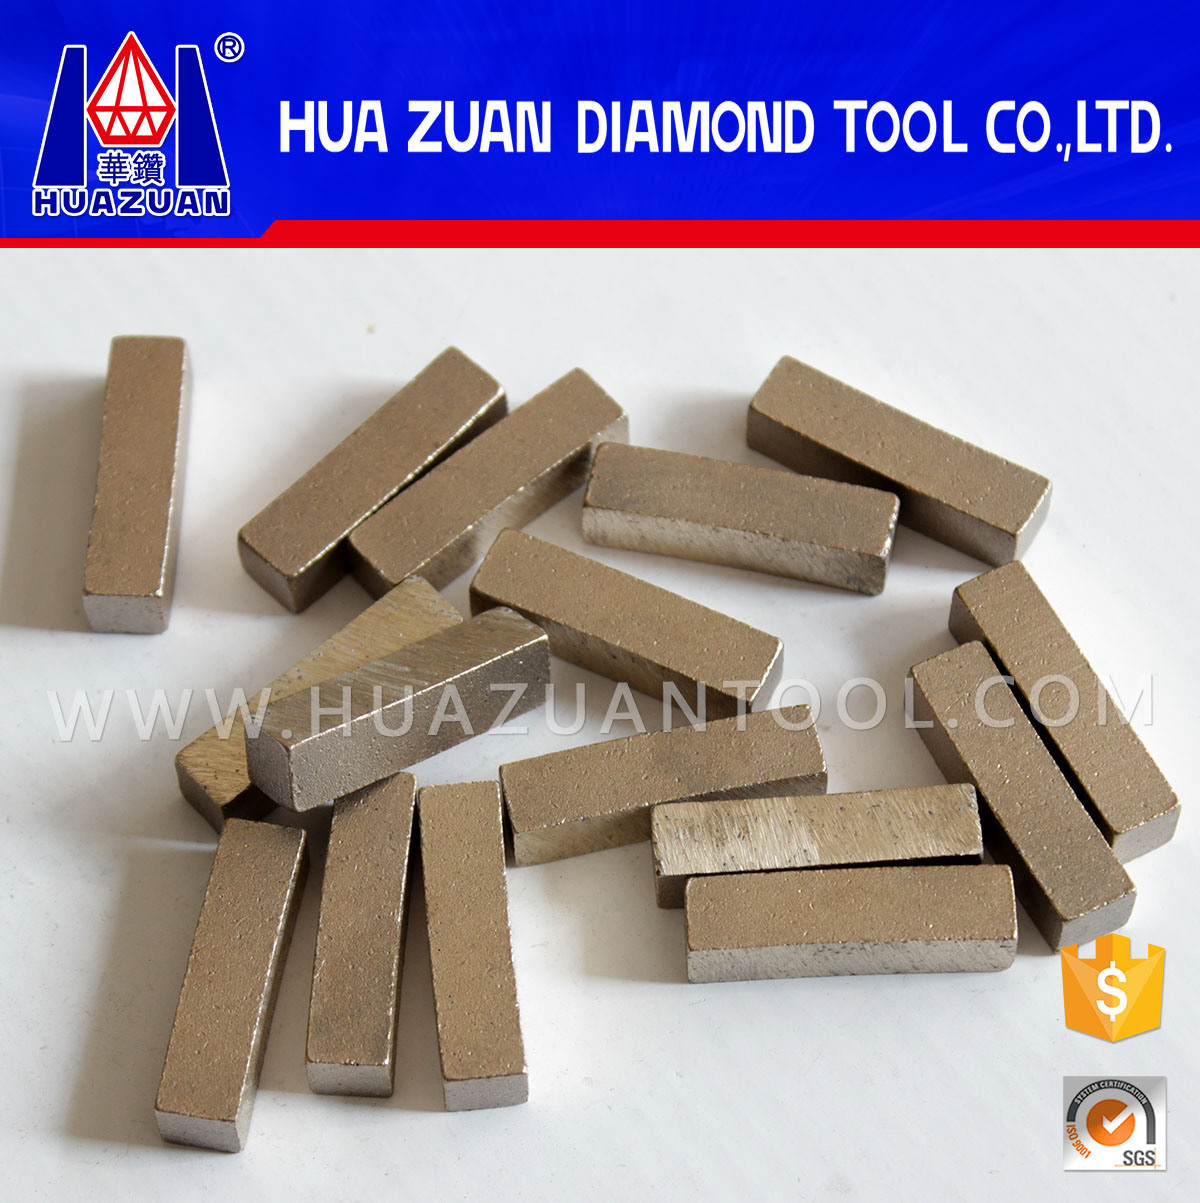 High Efficiency 1 Meter Stone Cutting Tools / Diamond Tips / Marble Cutting Segment for Sale